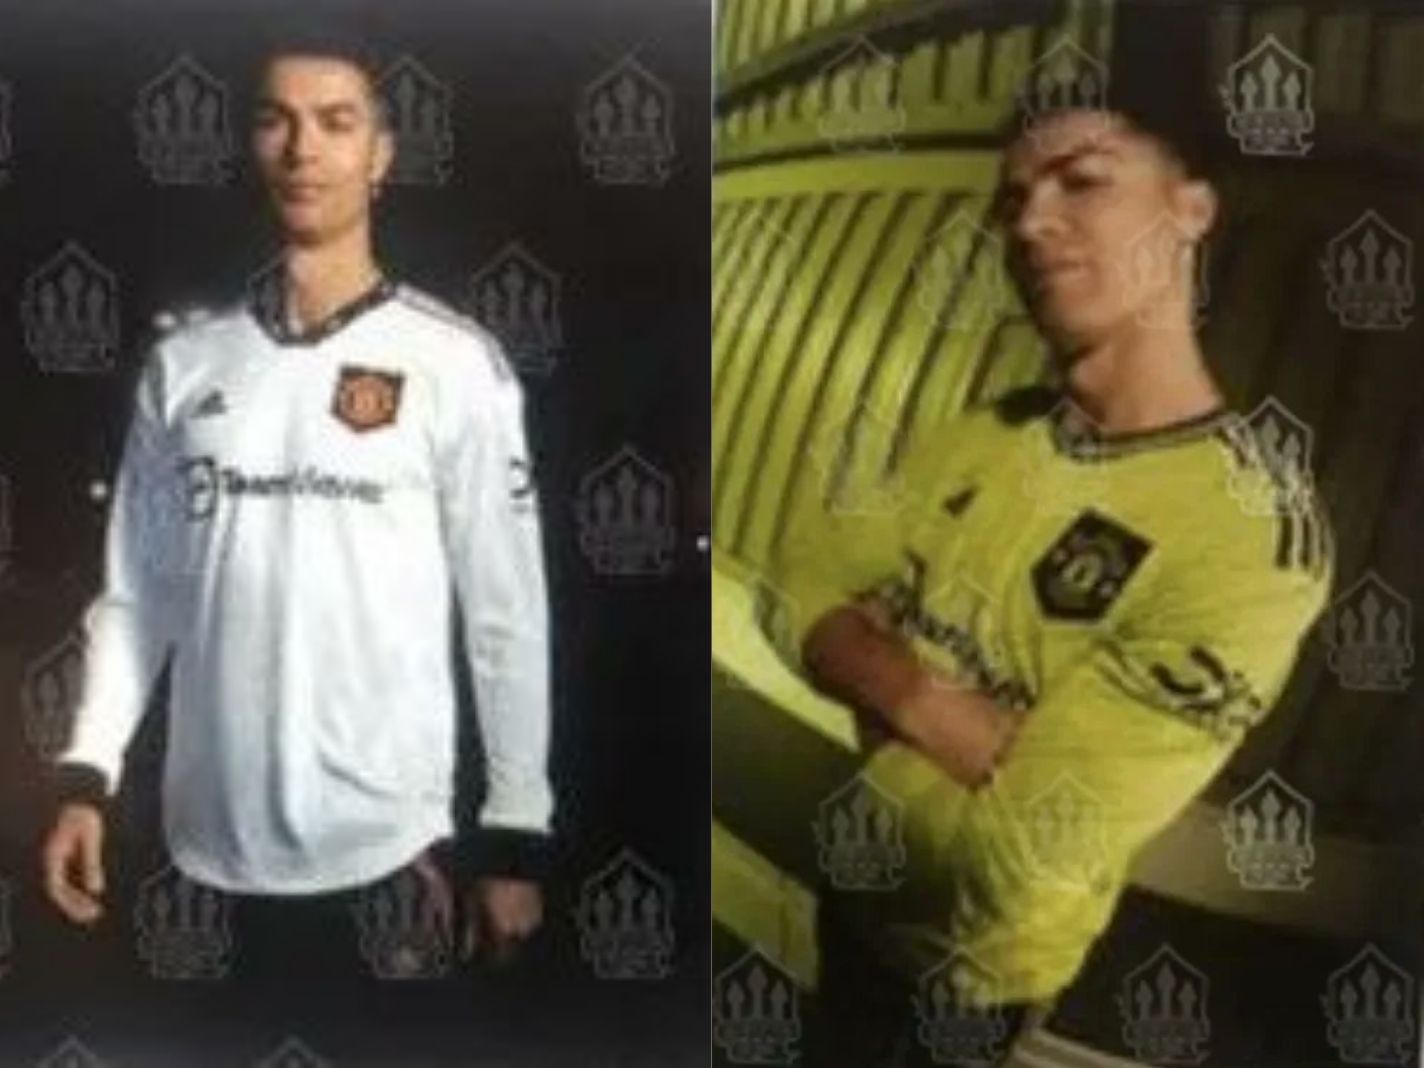 In this image - Cristiano Ronaldo wearing Man United away and third kit for 22/23 season